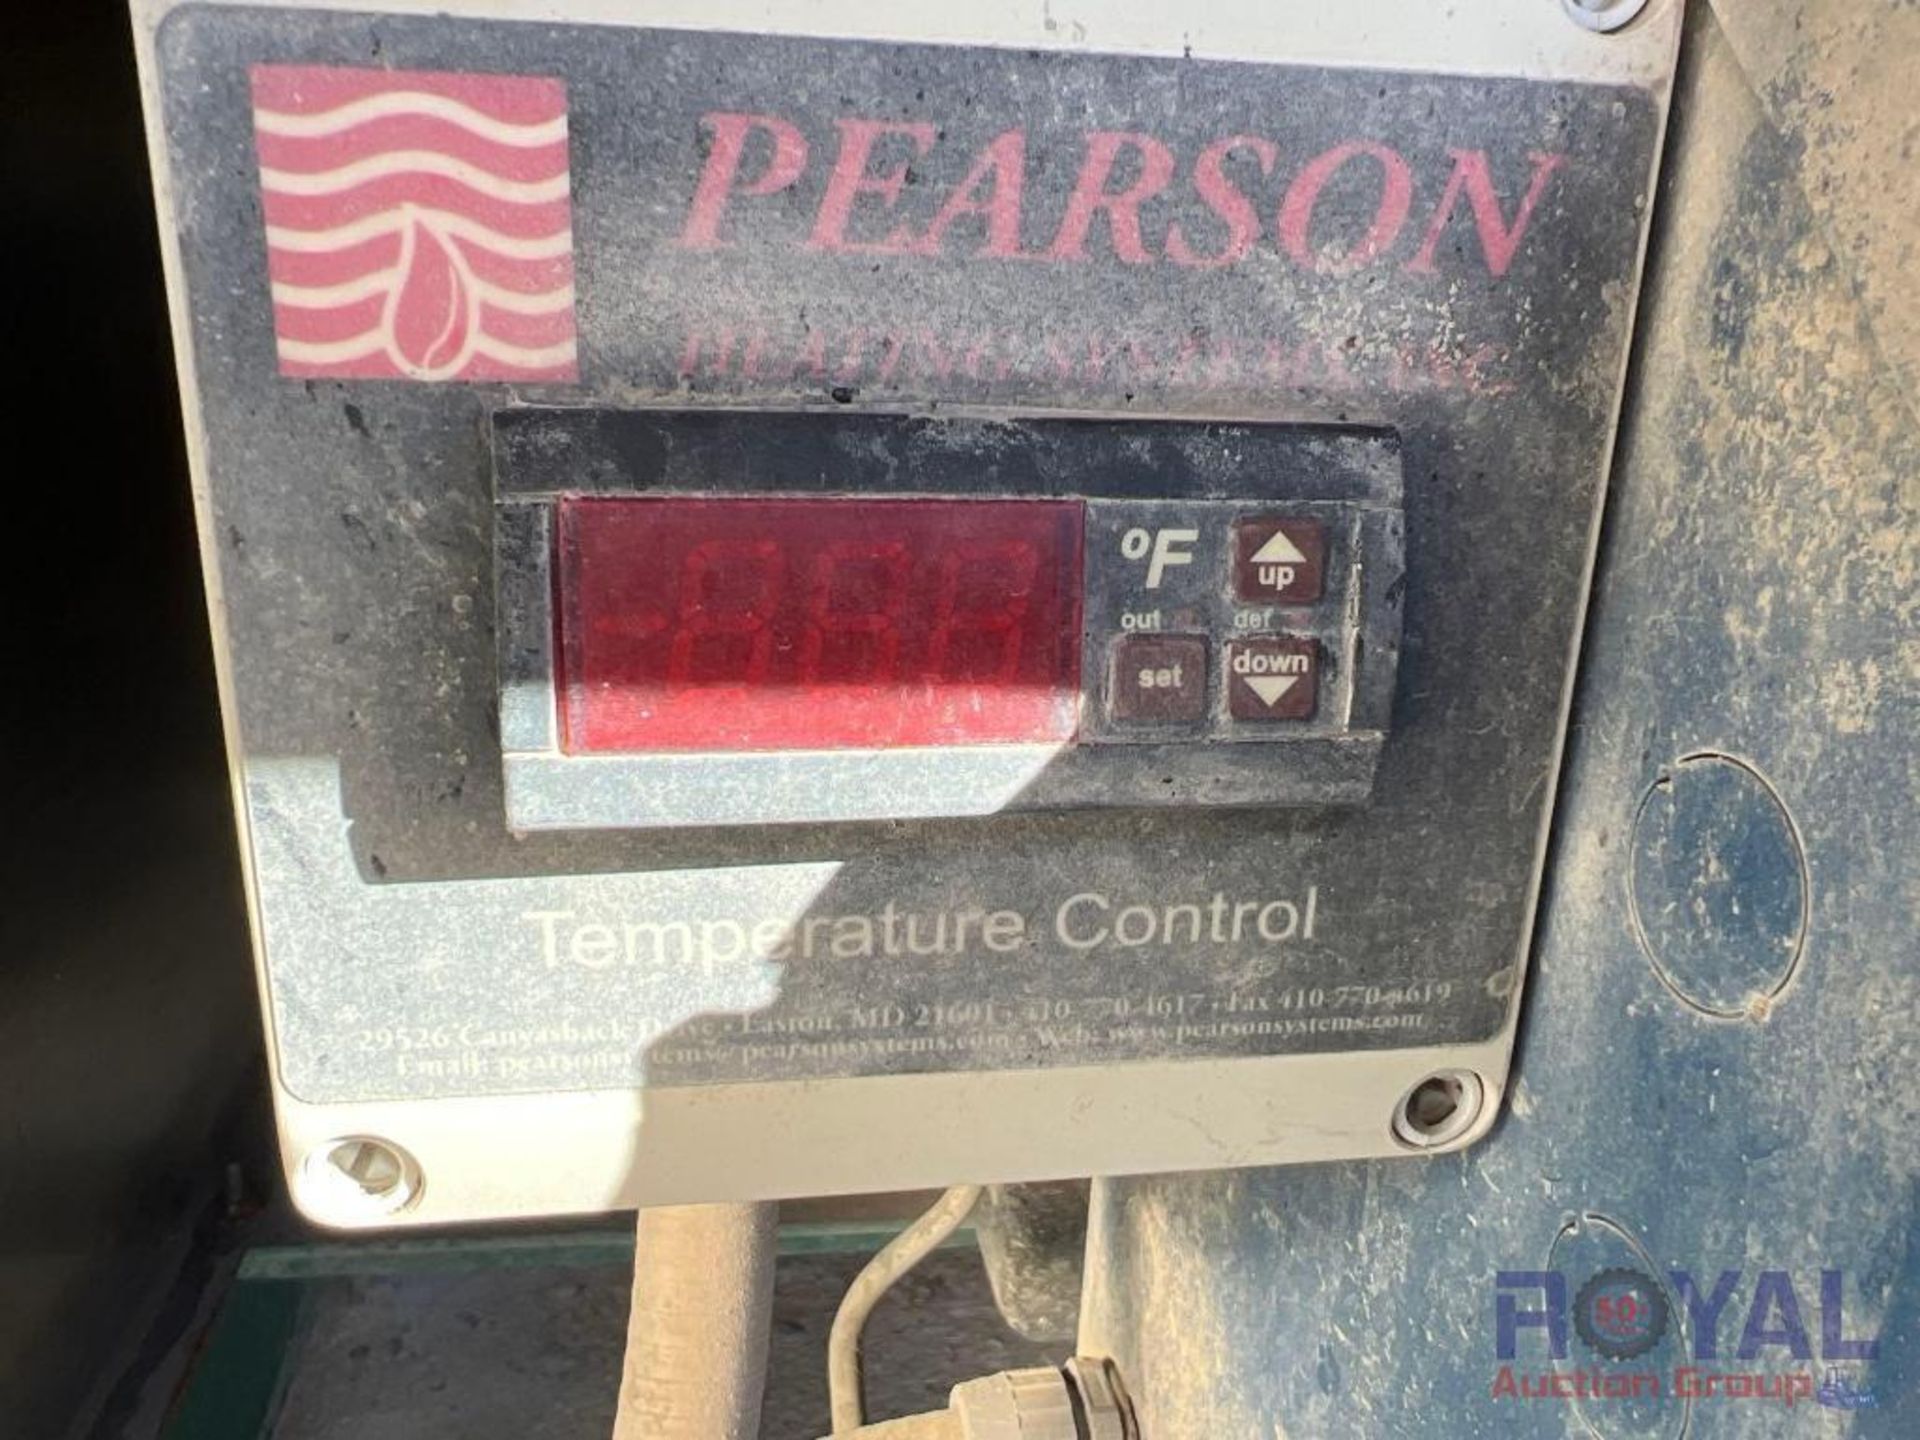 Pearson P-10-25W Water Heater - Image 12 of 15